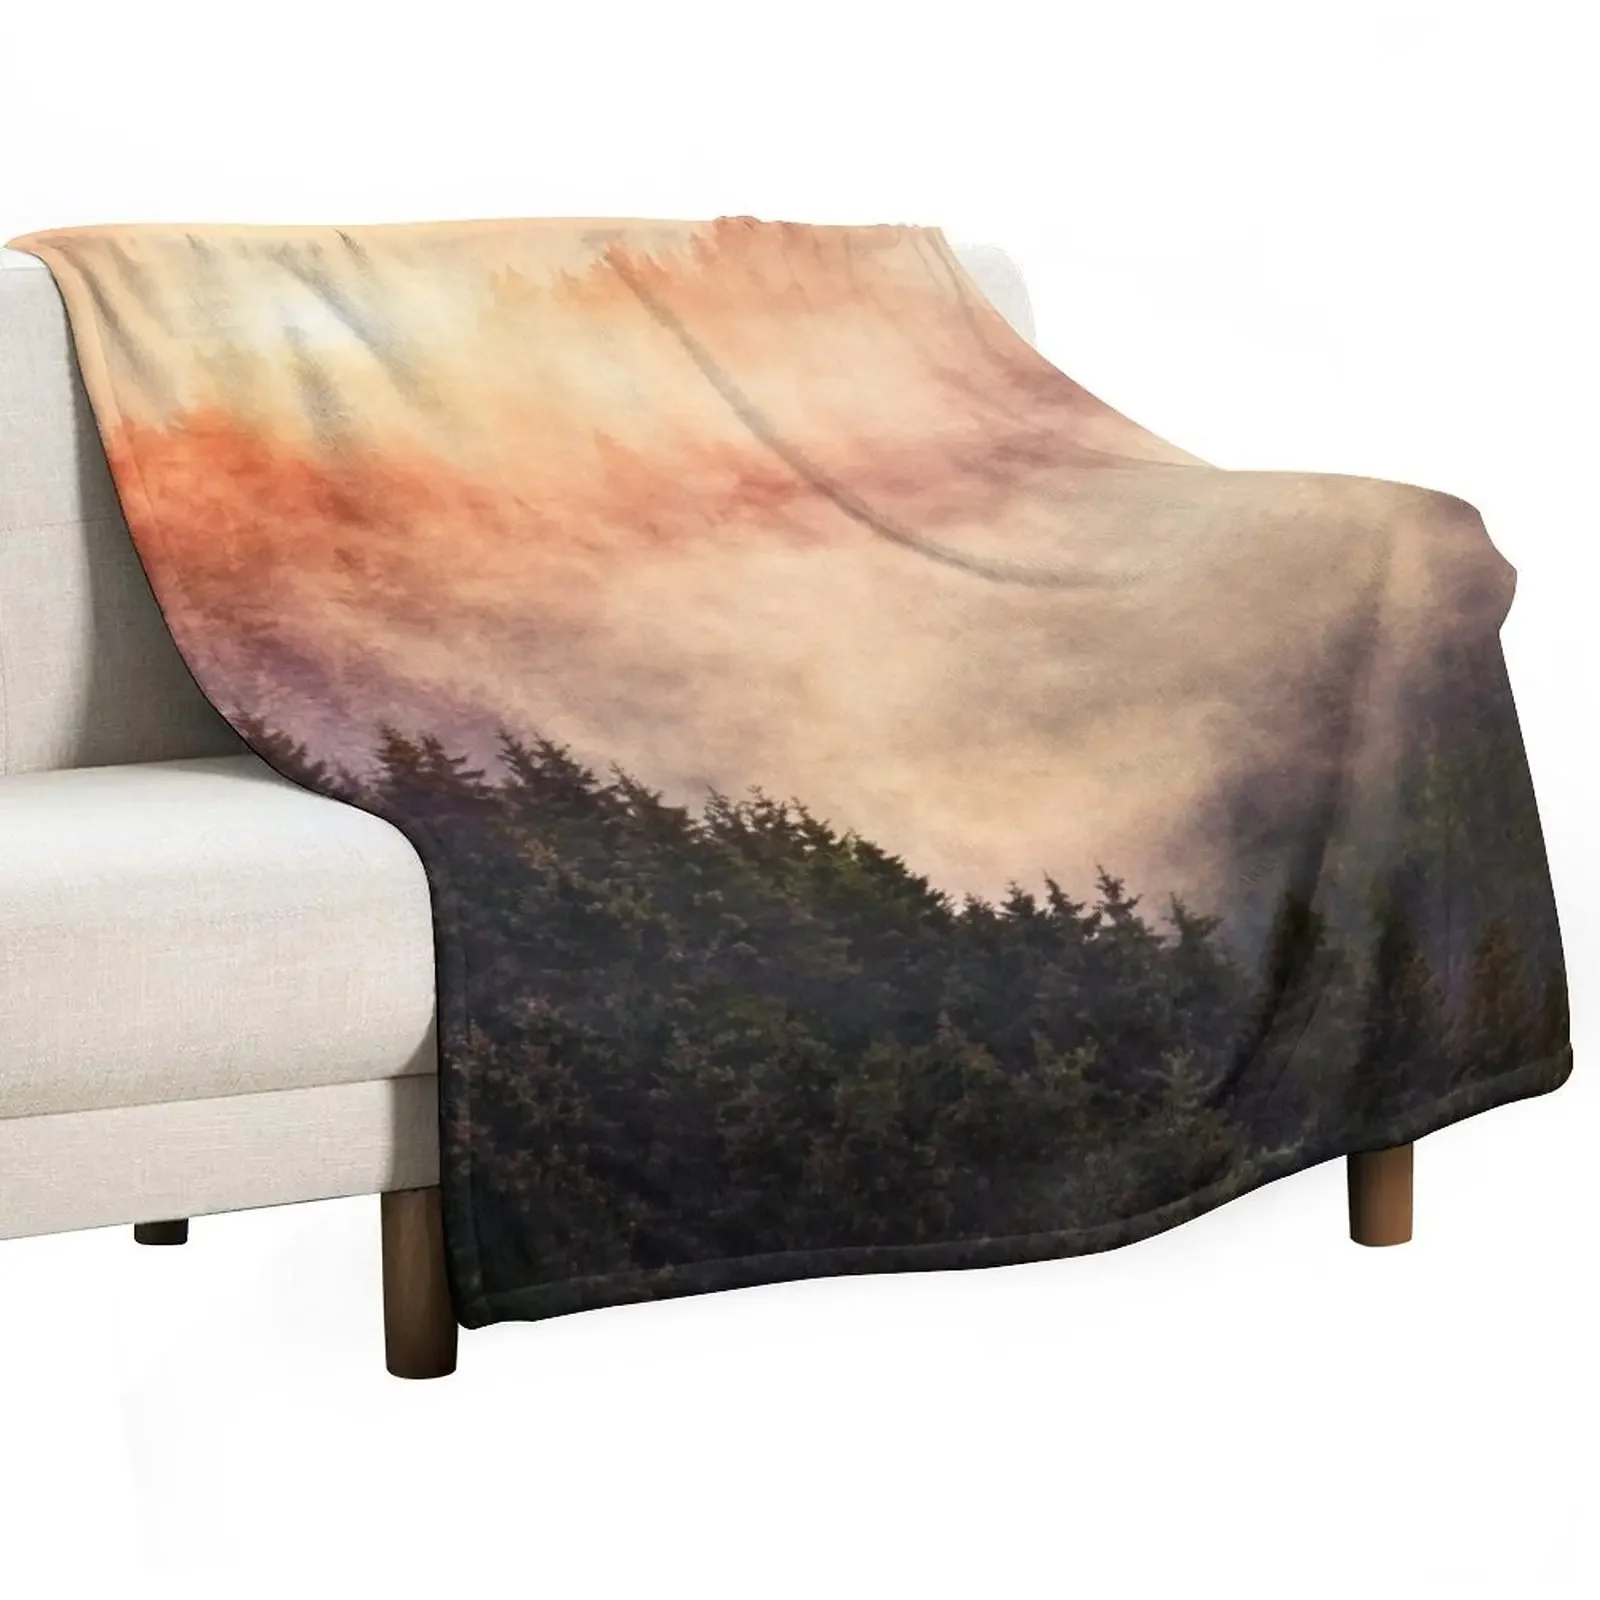 

In My Other World // Sunrise In A Romantic Misty Foggy Autumn Fairytale Wilderness Forest With Trees Covered In Fo Throw Blanket